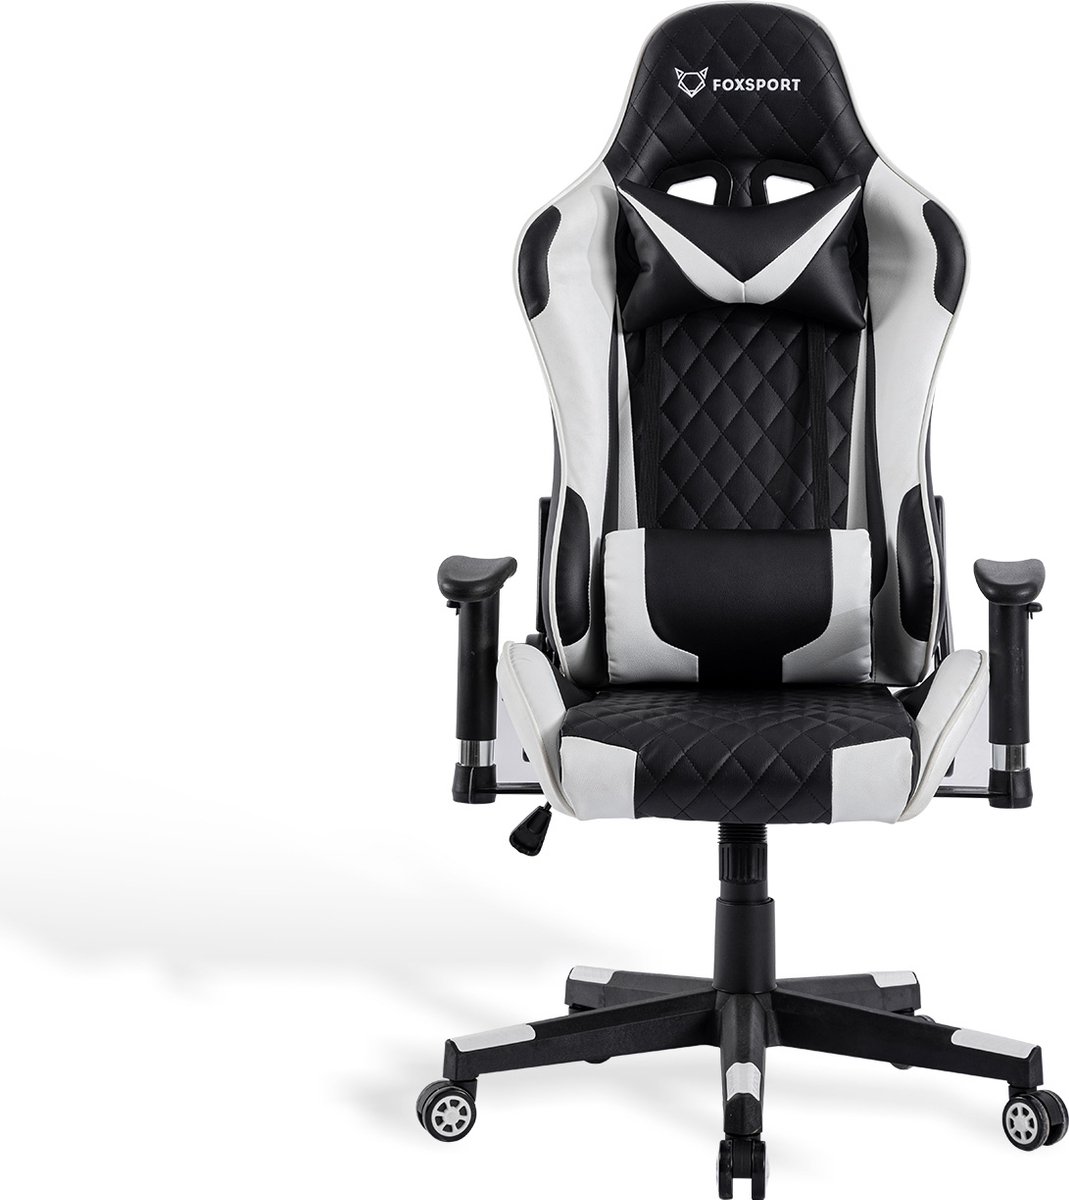 K IKIDO Game Chair - Chaise de Gaming - Chaise de Gaming - Chaise